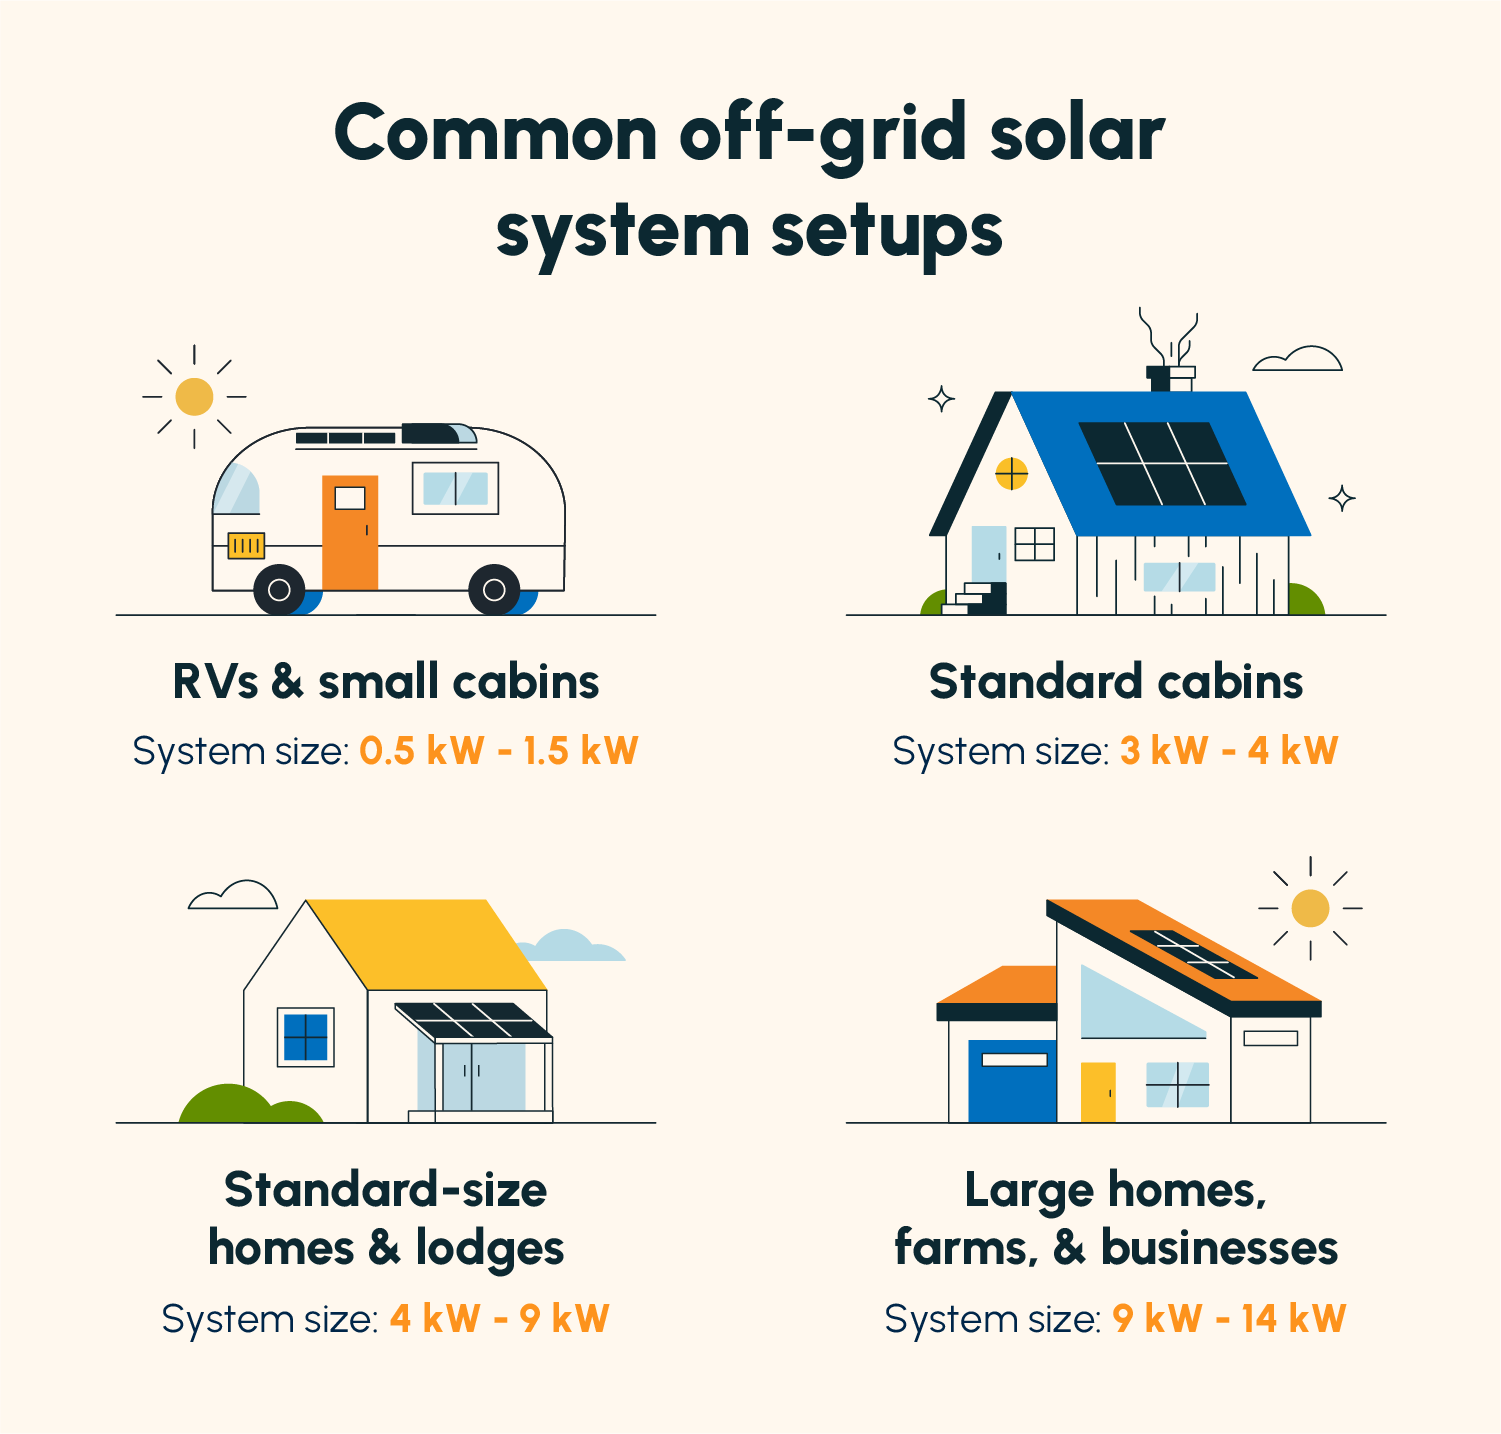 Four illustrated off-grid solar system setups with average system size suggestions